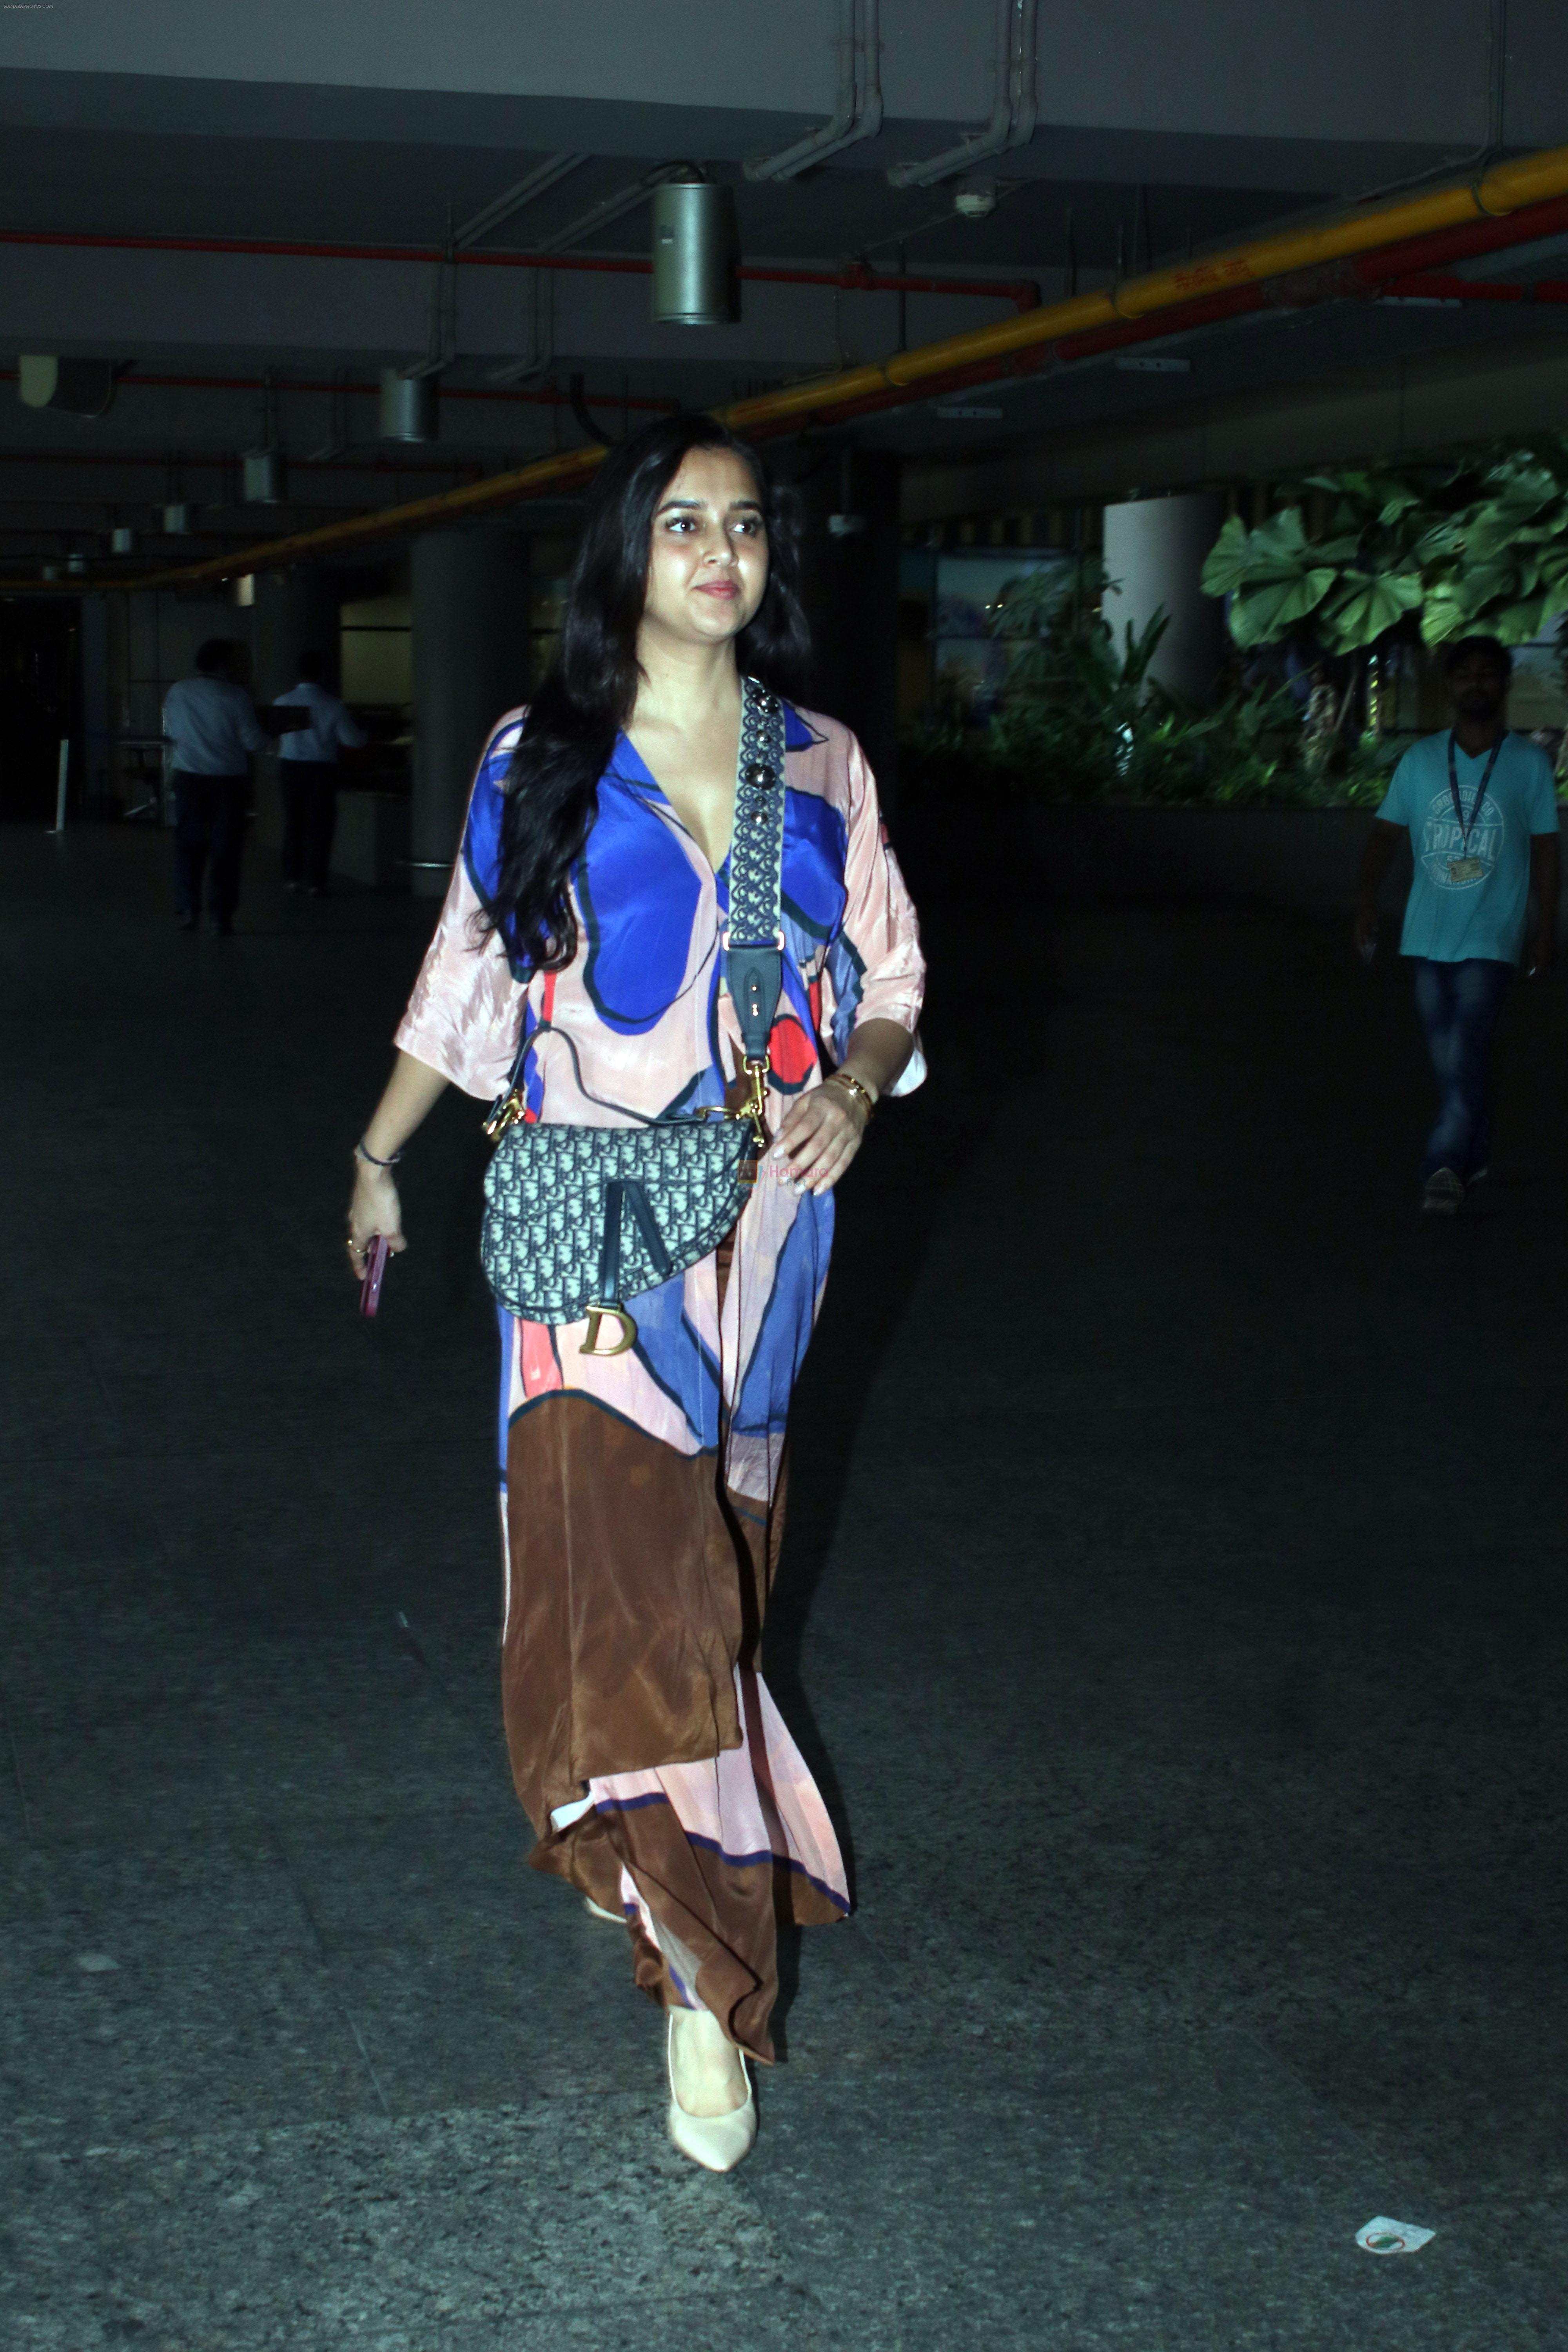 Tejasswi Prakash and Karan Kundrra Spotted At Airport Arrival on 8th August 2023